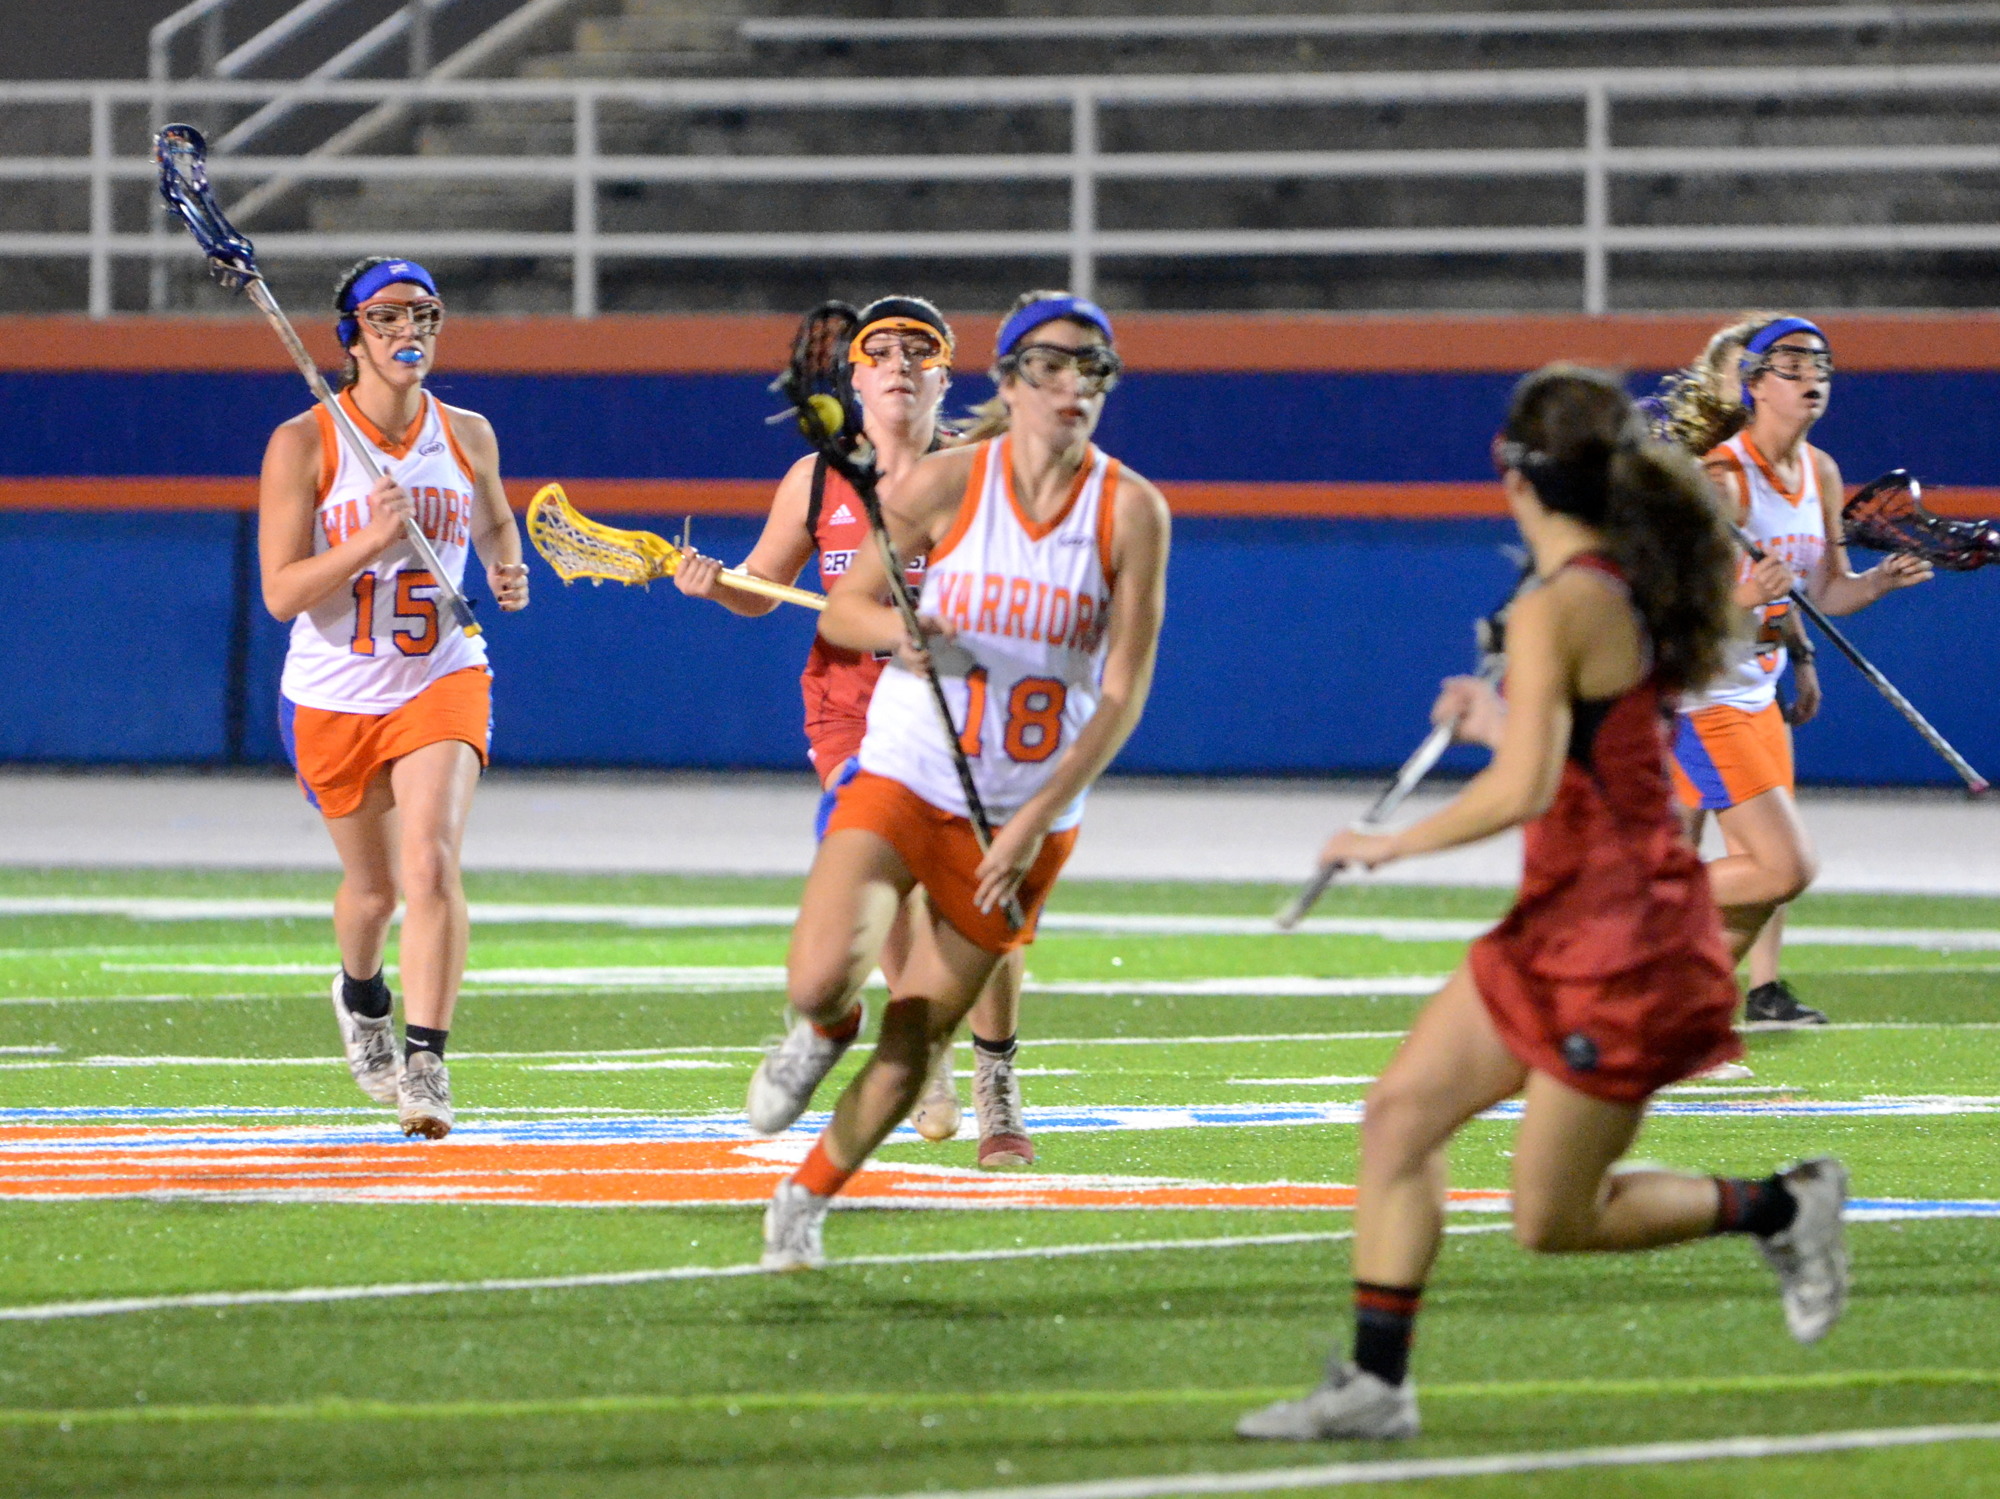 The West Orange girls lacrosse team earned the top seed in its district.